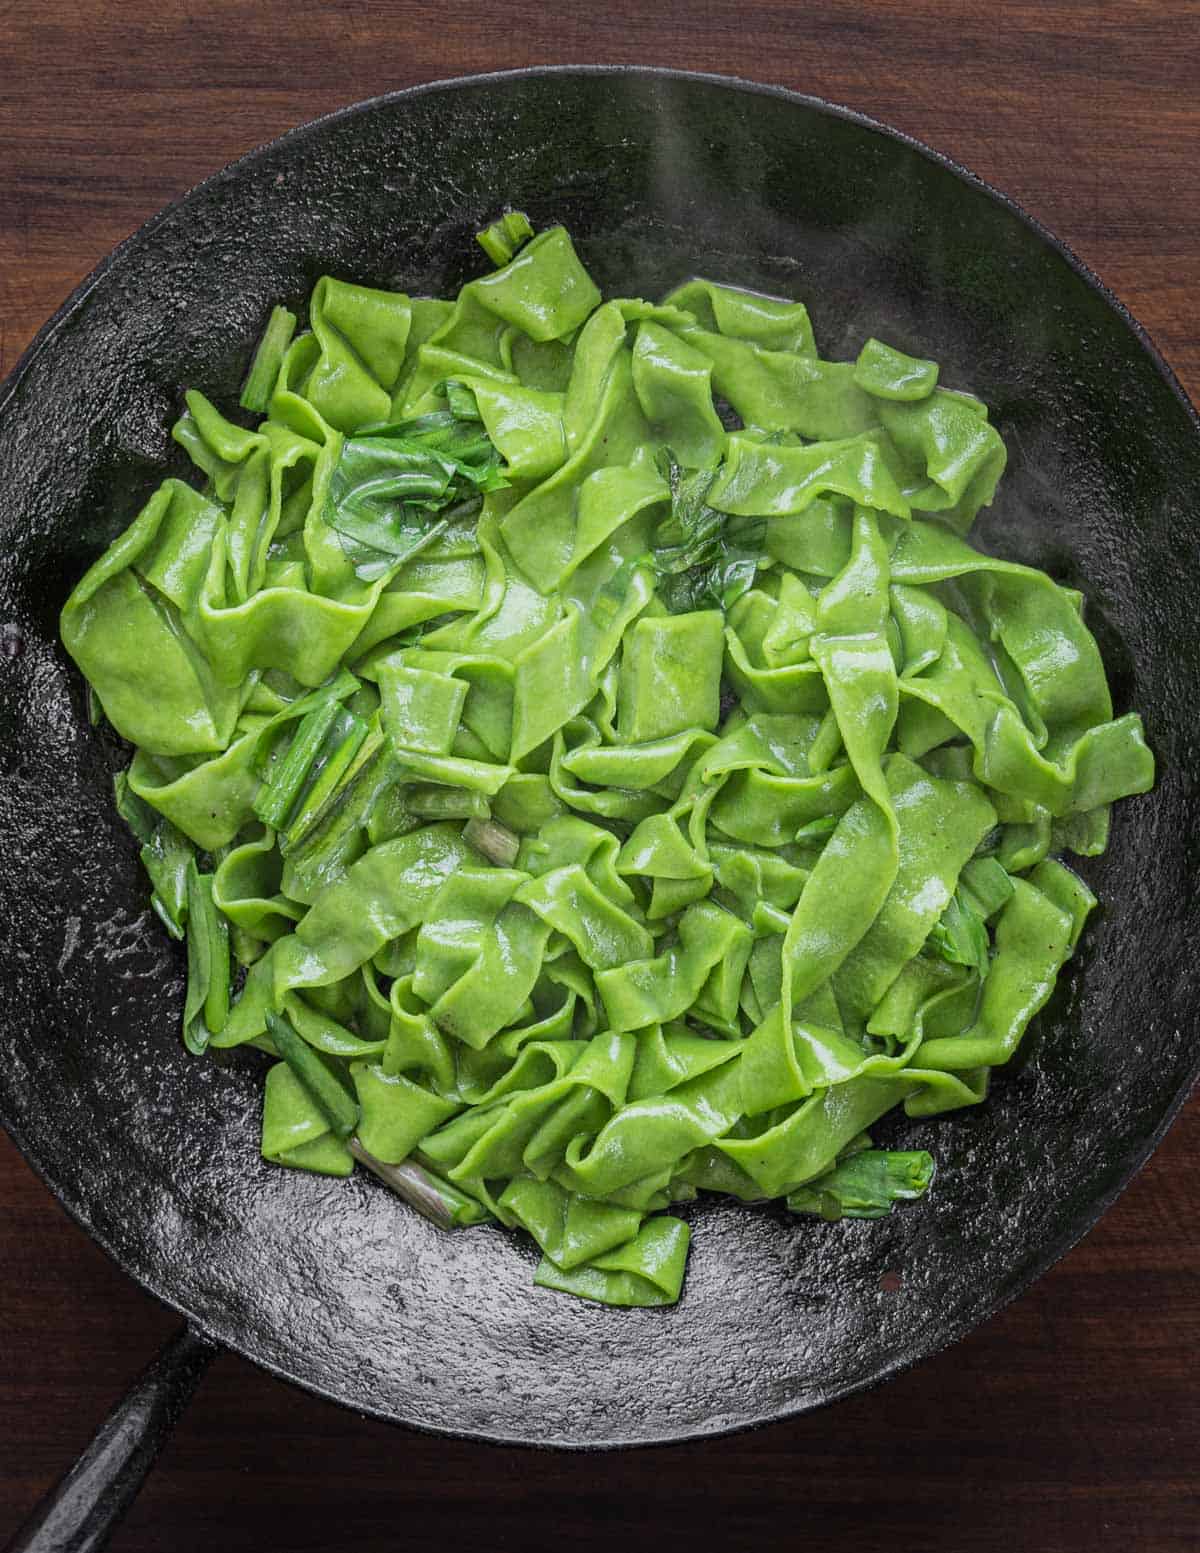 Bright green ramp pasta in a saute pan with ramp leaves and butter.